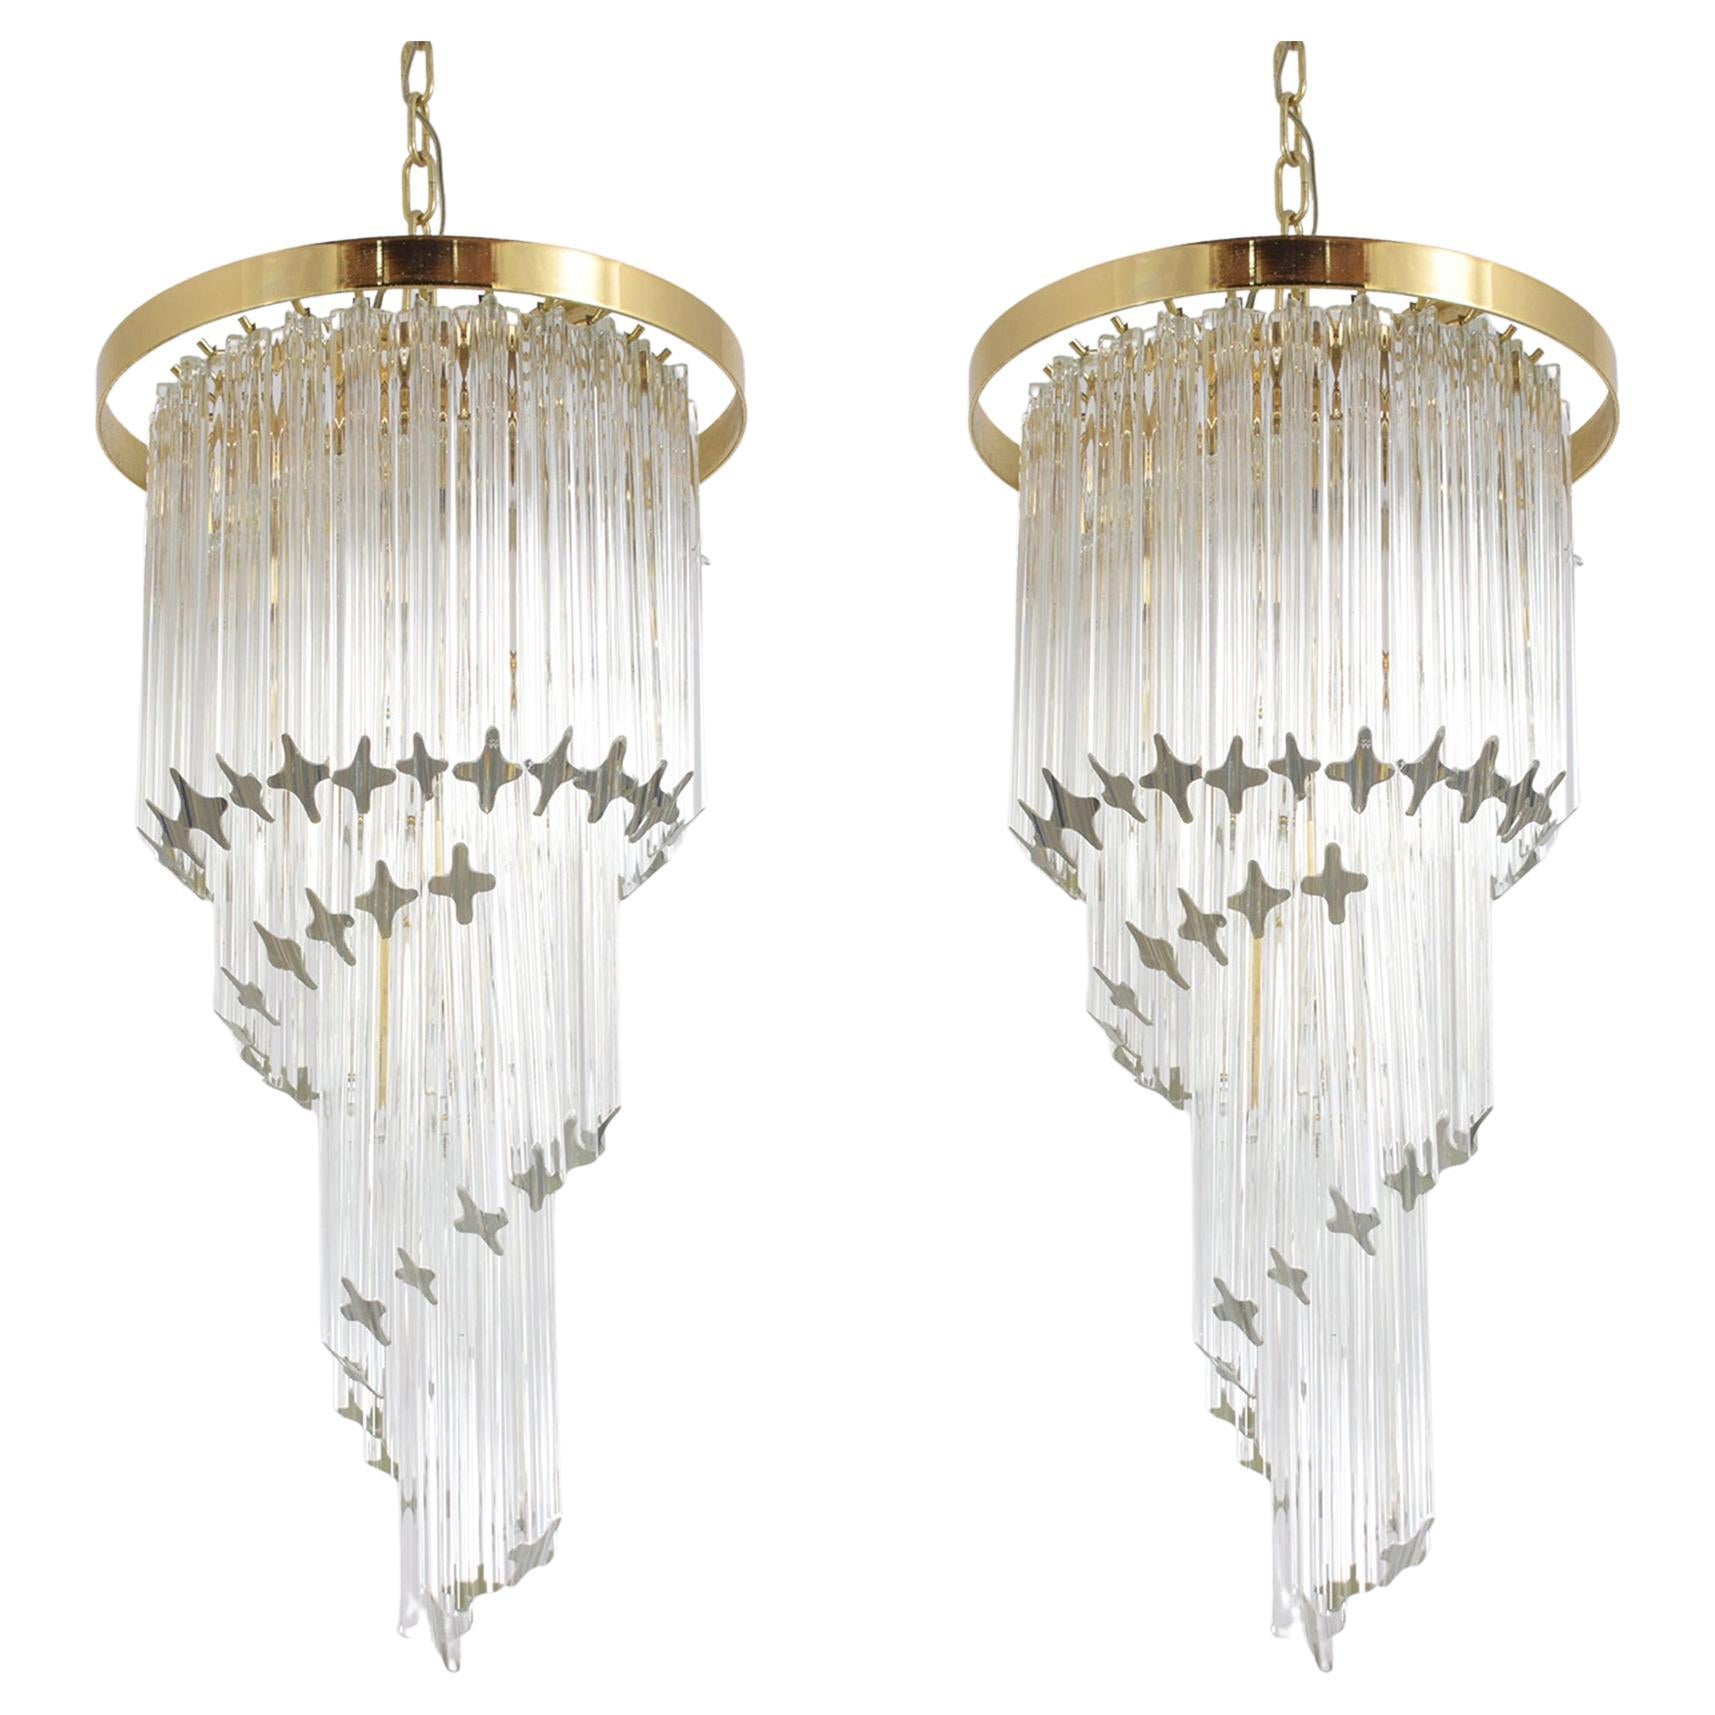 Vintage Drop Pendant Chandelier: Timeless Elegance in Brass and Glass